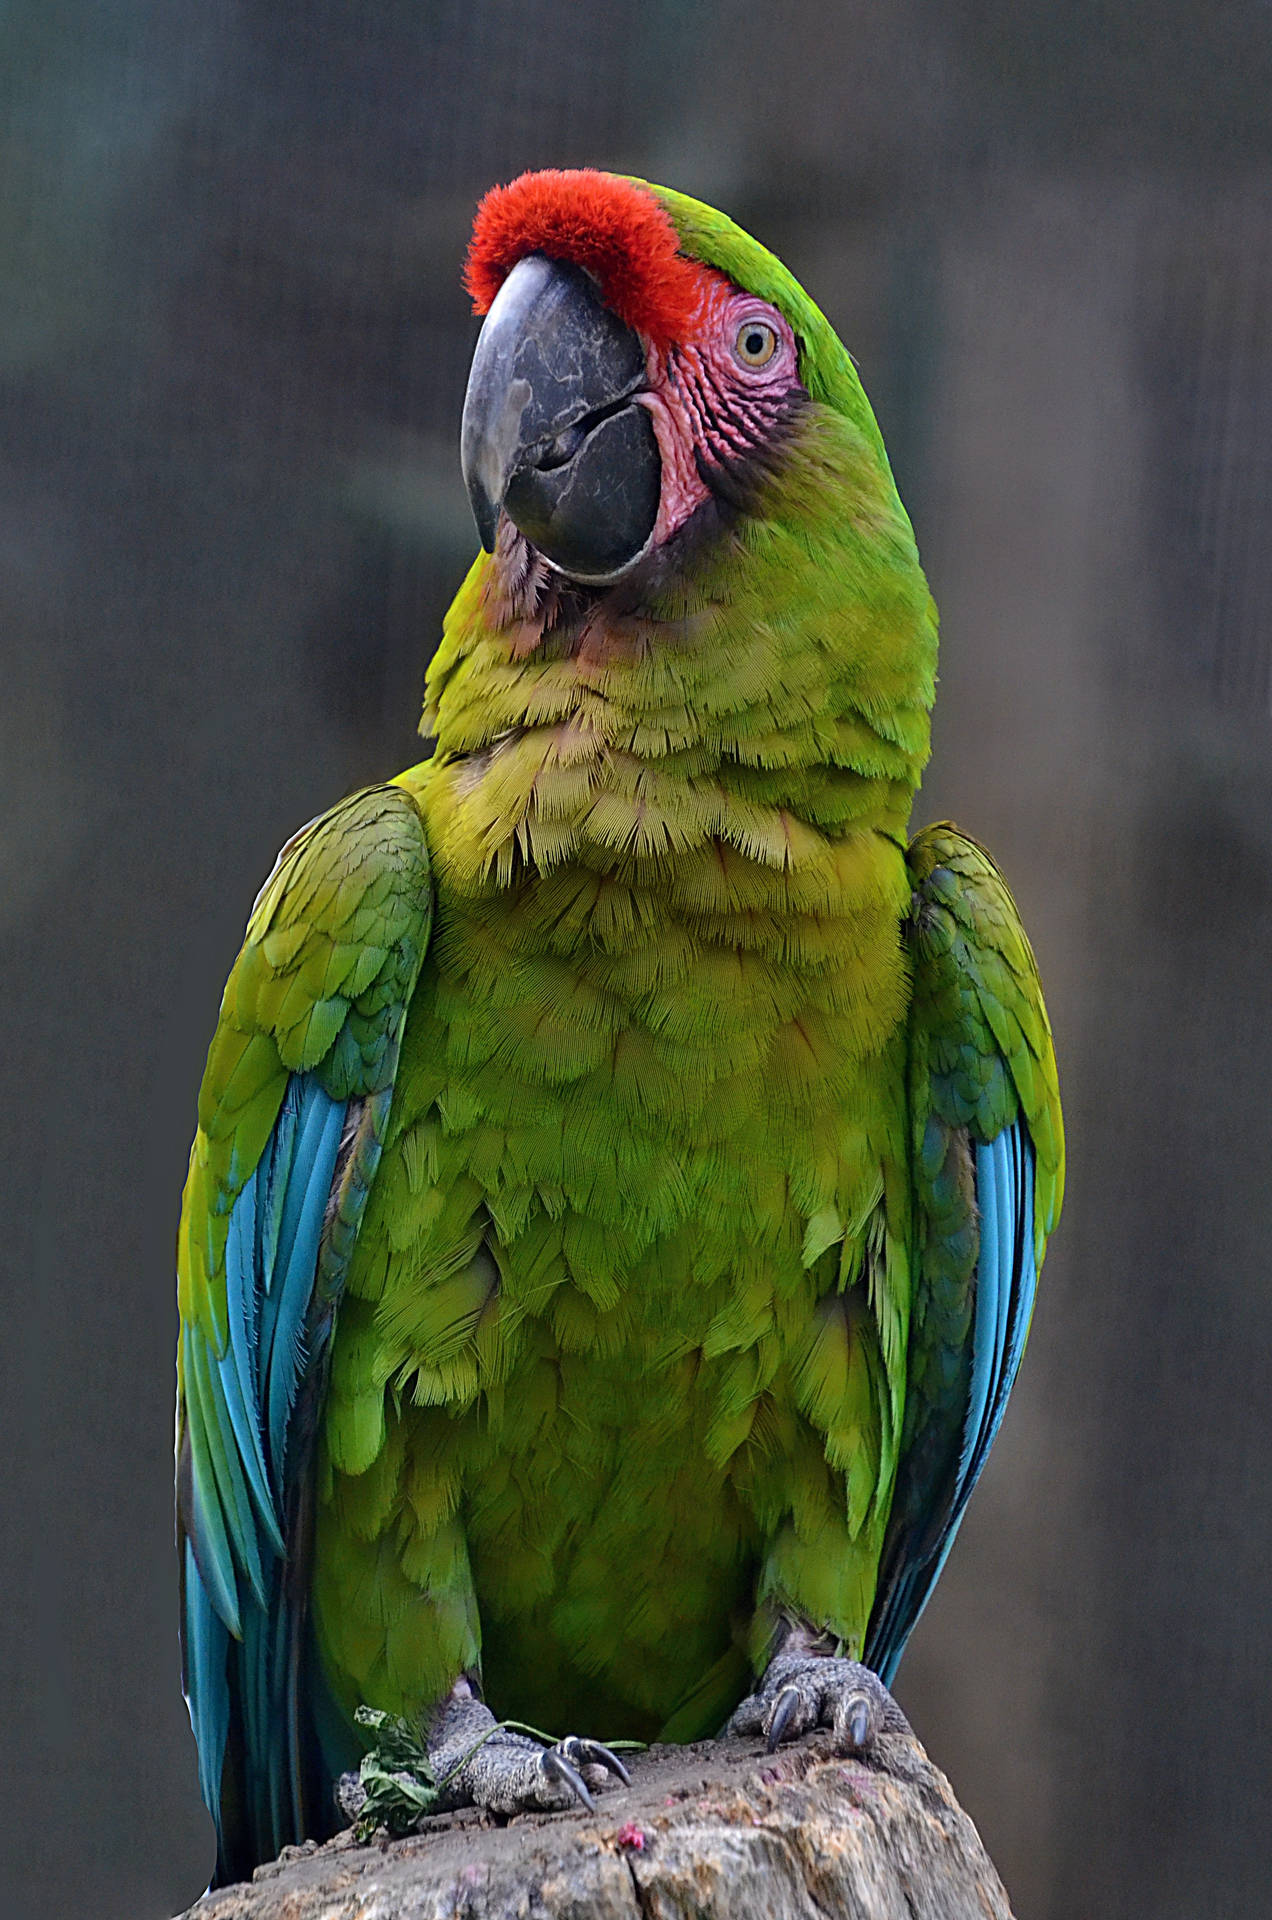 Red, Blue, And Green Parrot HD Wallpaper